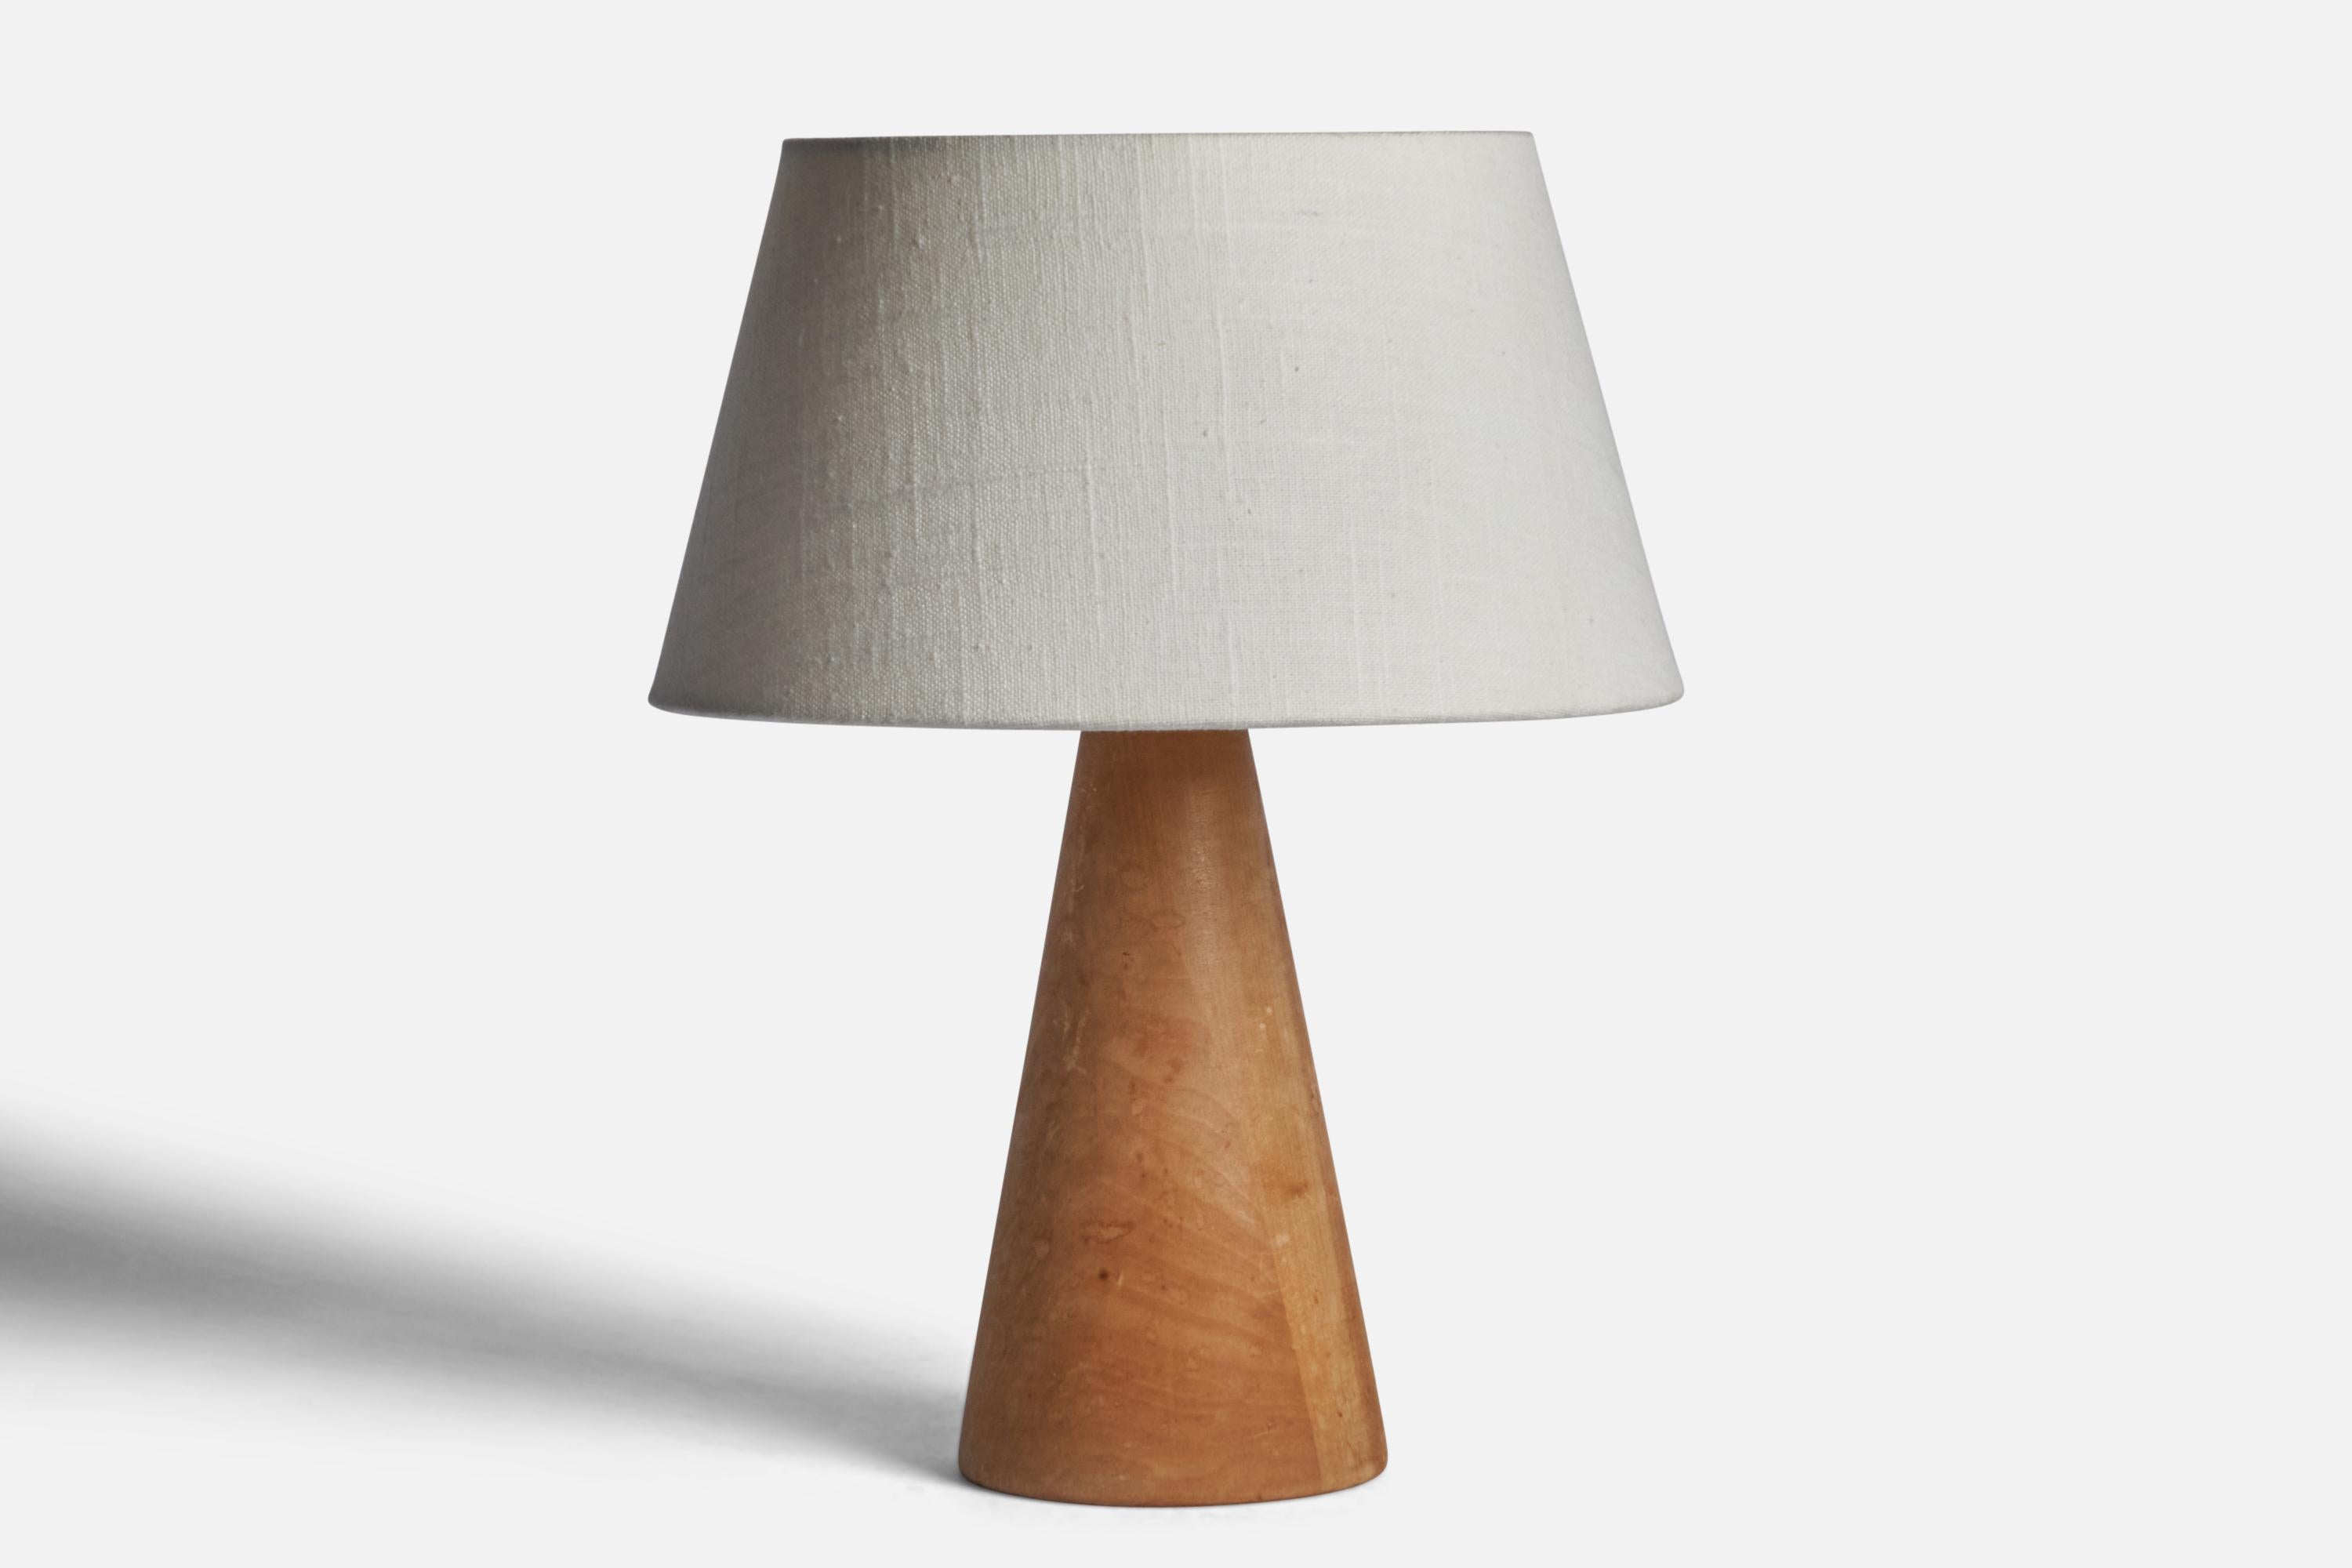 A birch table lamp designed and produced in Sweden, 1950s.

Dimensions of Lamp (inches): 10.25” H x 4.20” Diameter
Dimensions of Shade (inches): 7” Top Diameter x 10” Bottom Diameter x 5.5” H 
Dimensions of Lamp with Shade (inches): 13.15” H x